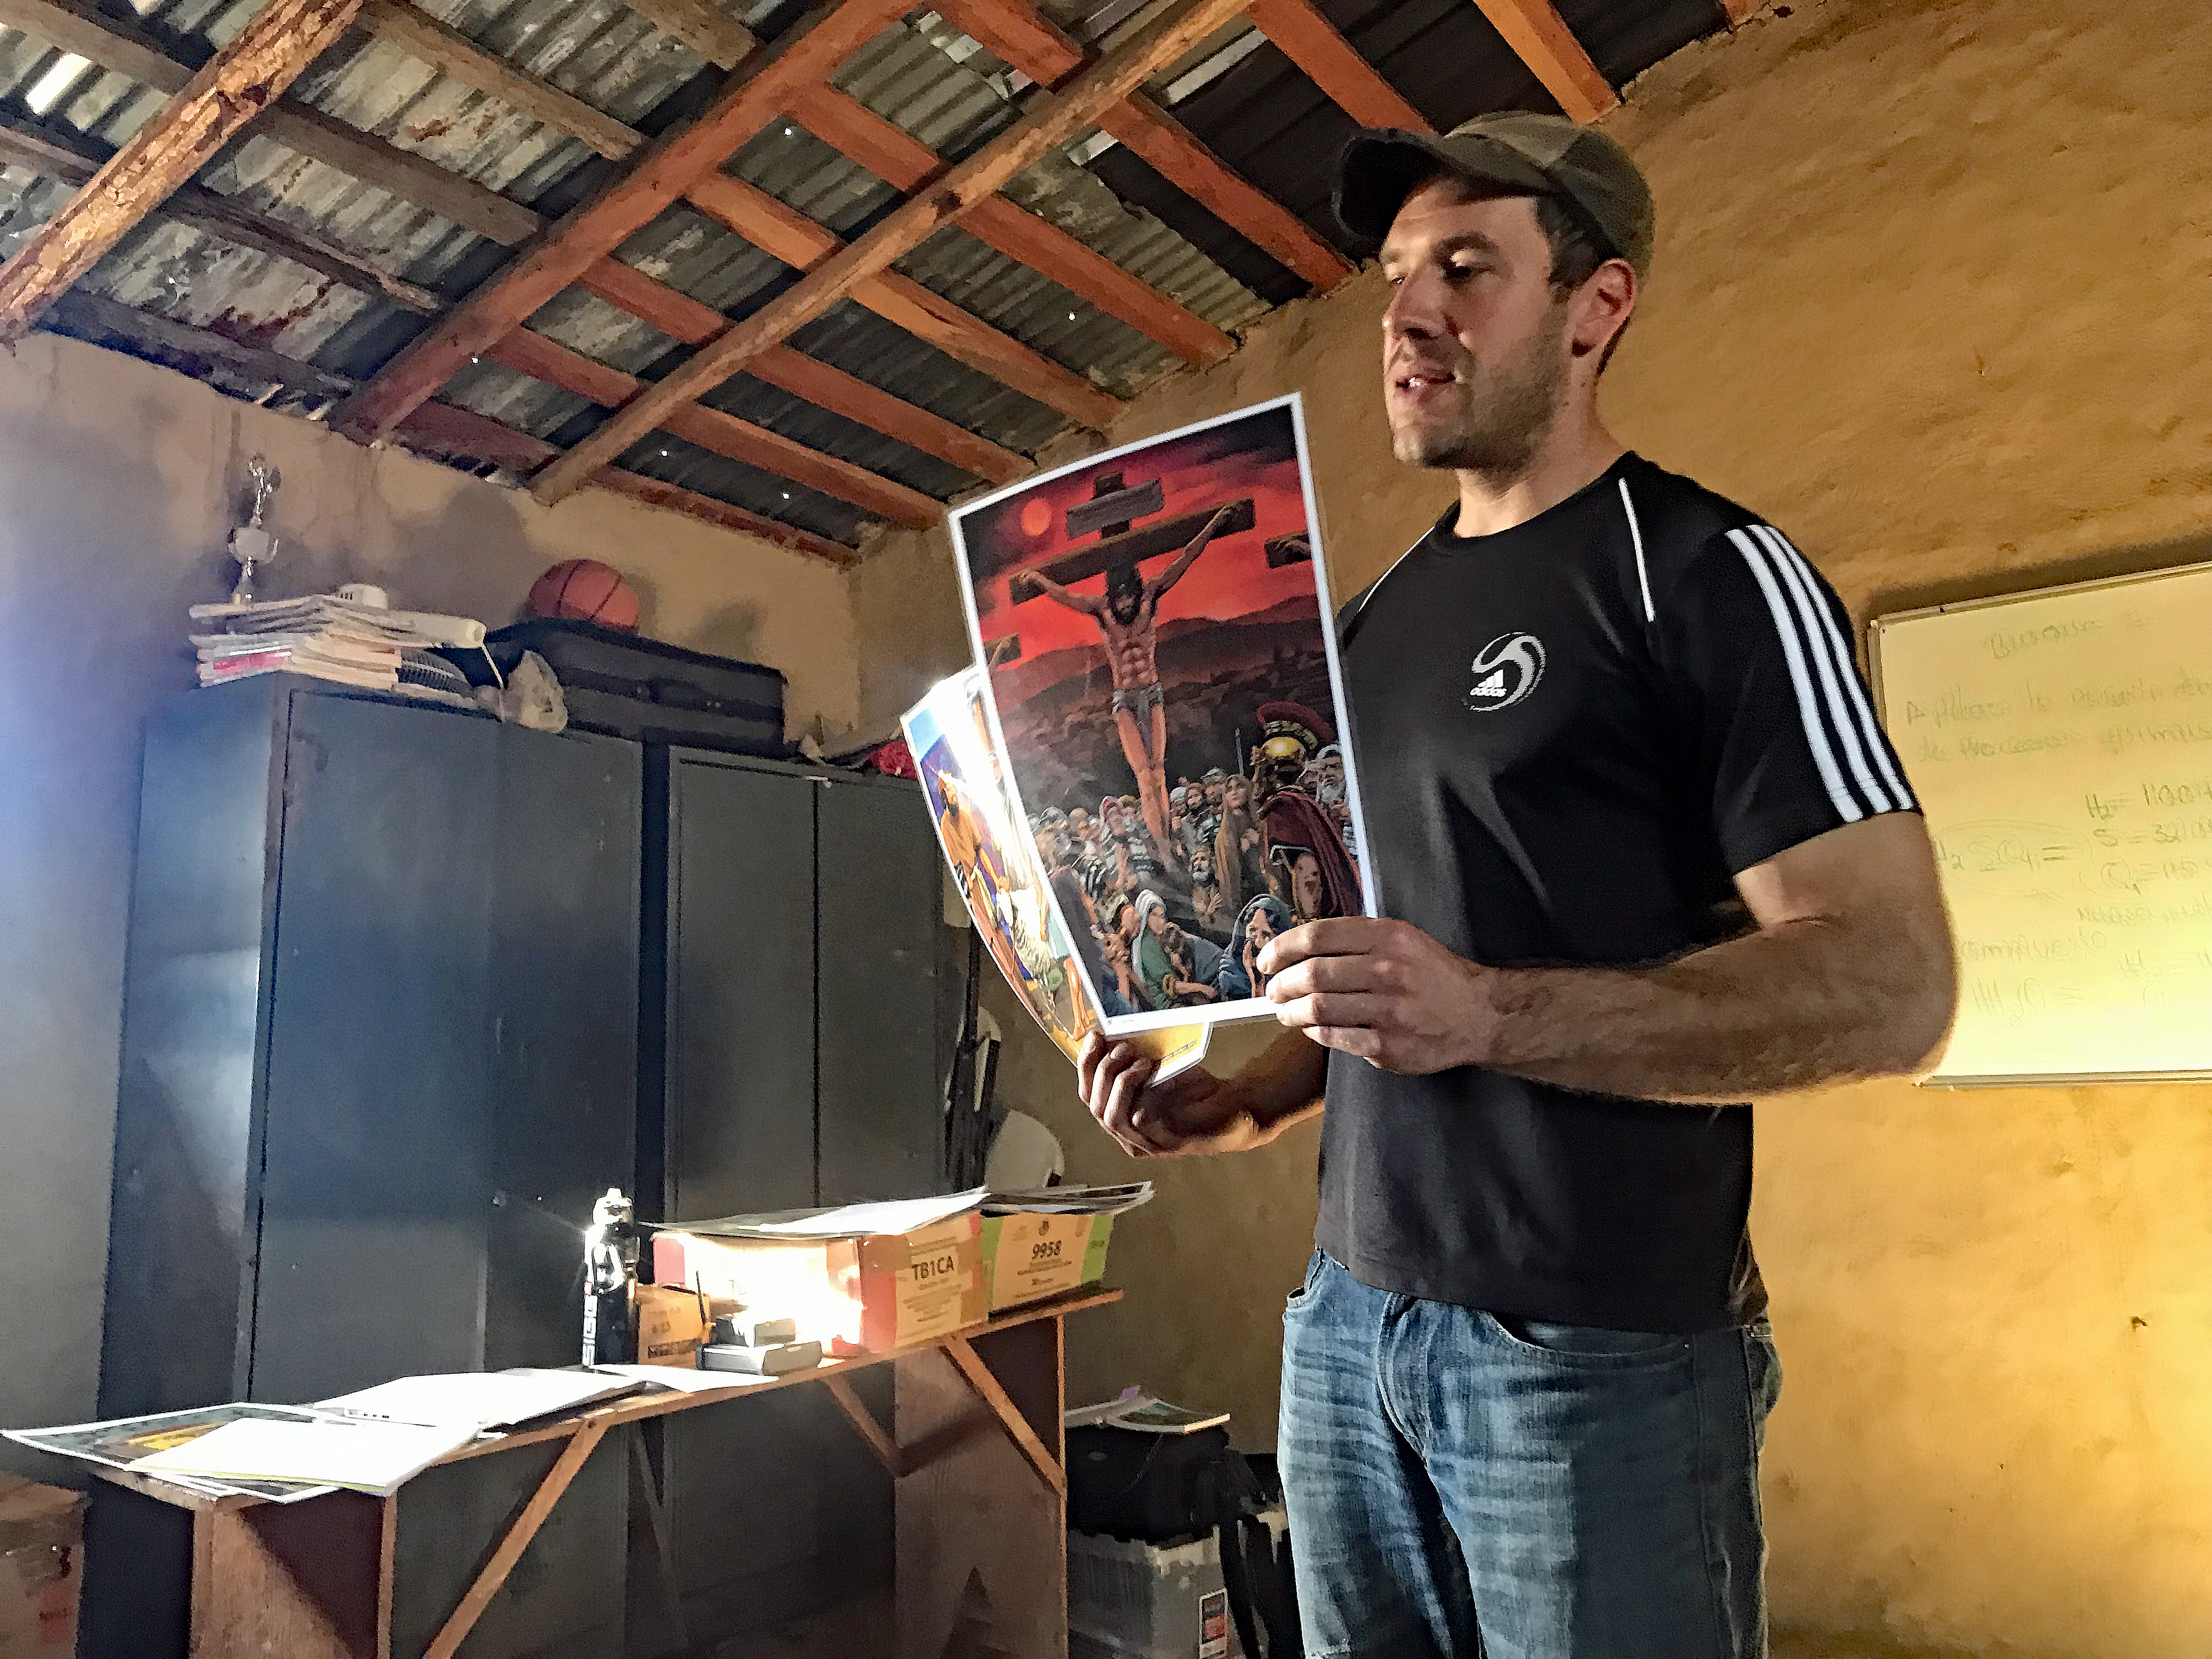 Our coworker Pete, holding lesson notes and an illustration of Christ on the Cross, teaching inside a school room in Las Moras